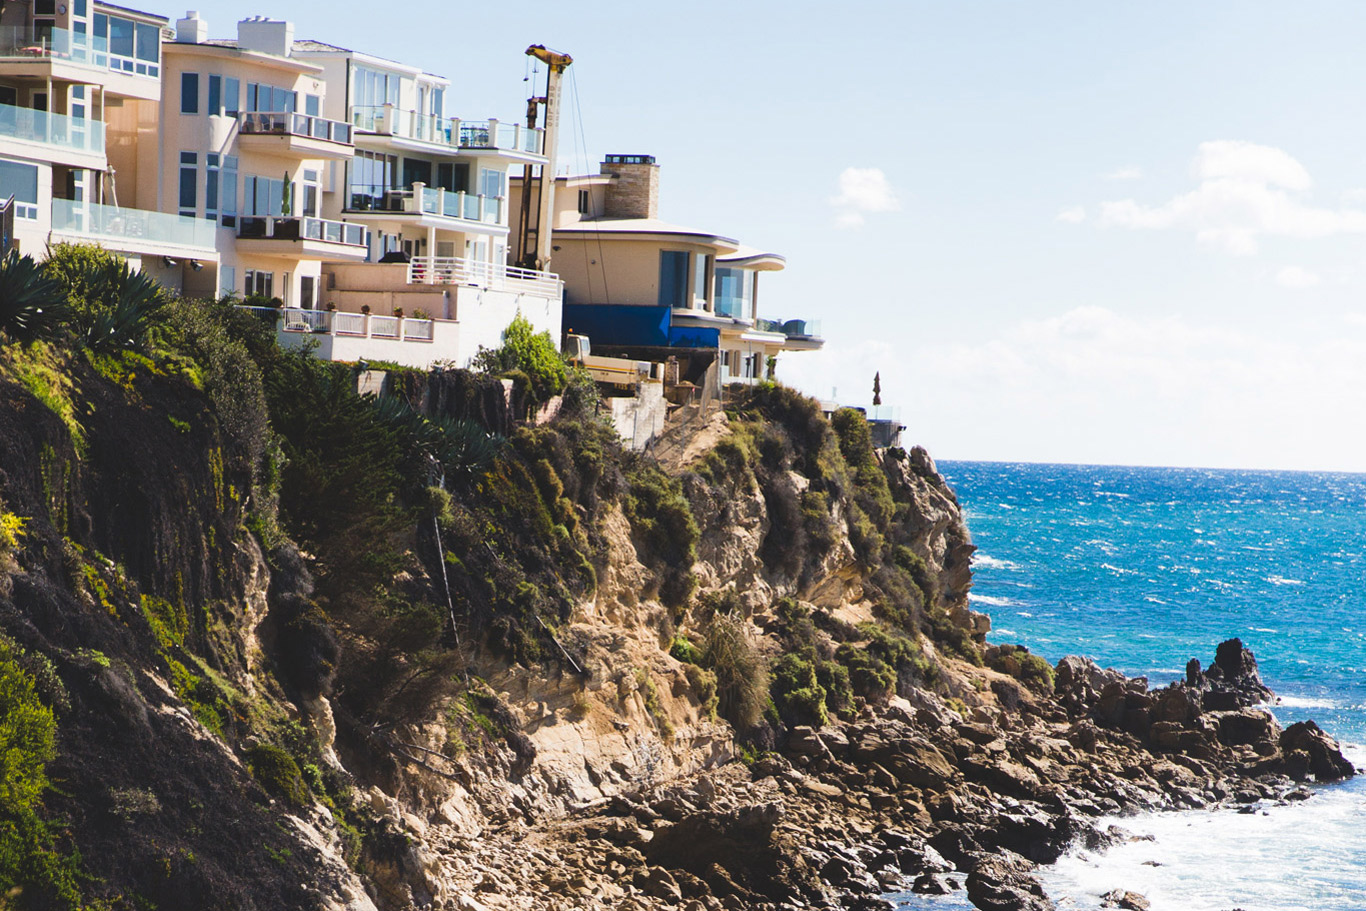 Scenic view of beautiful cliff-side homes overlooking the ocean.